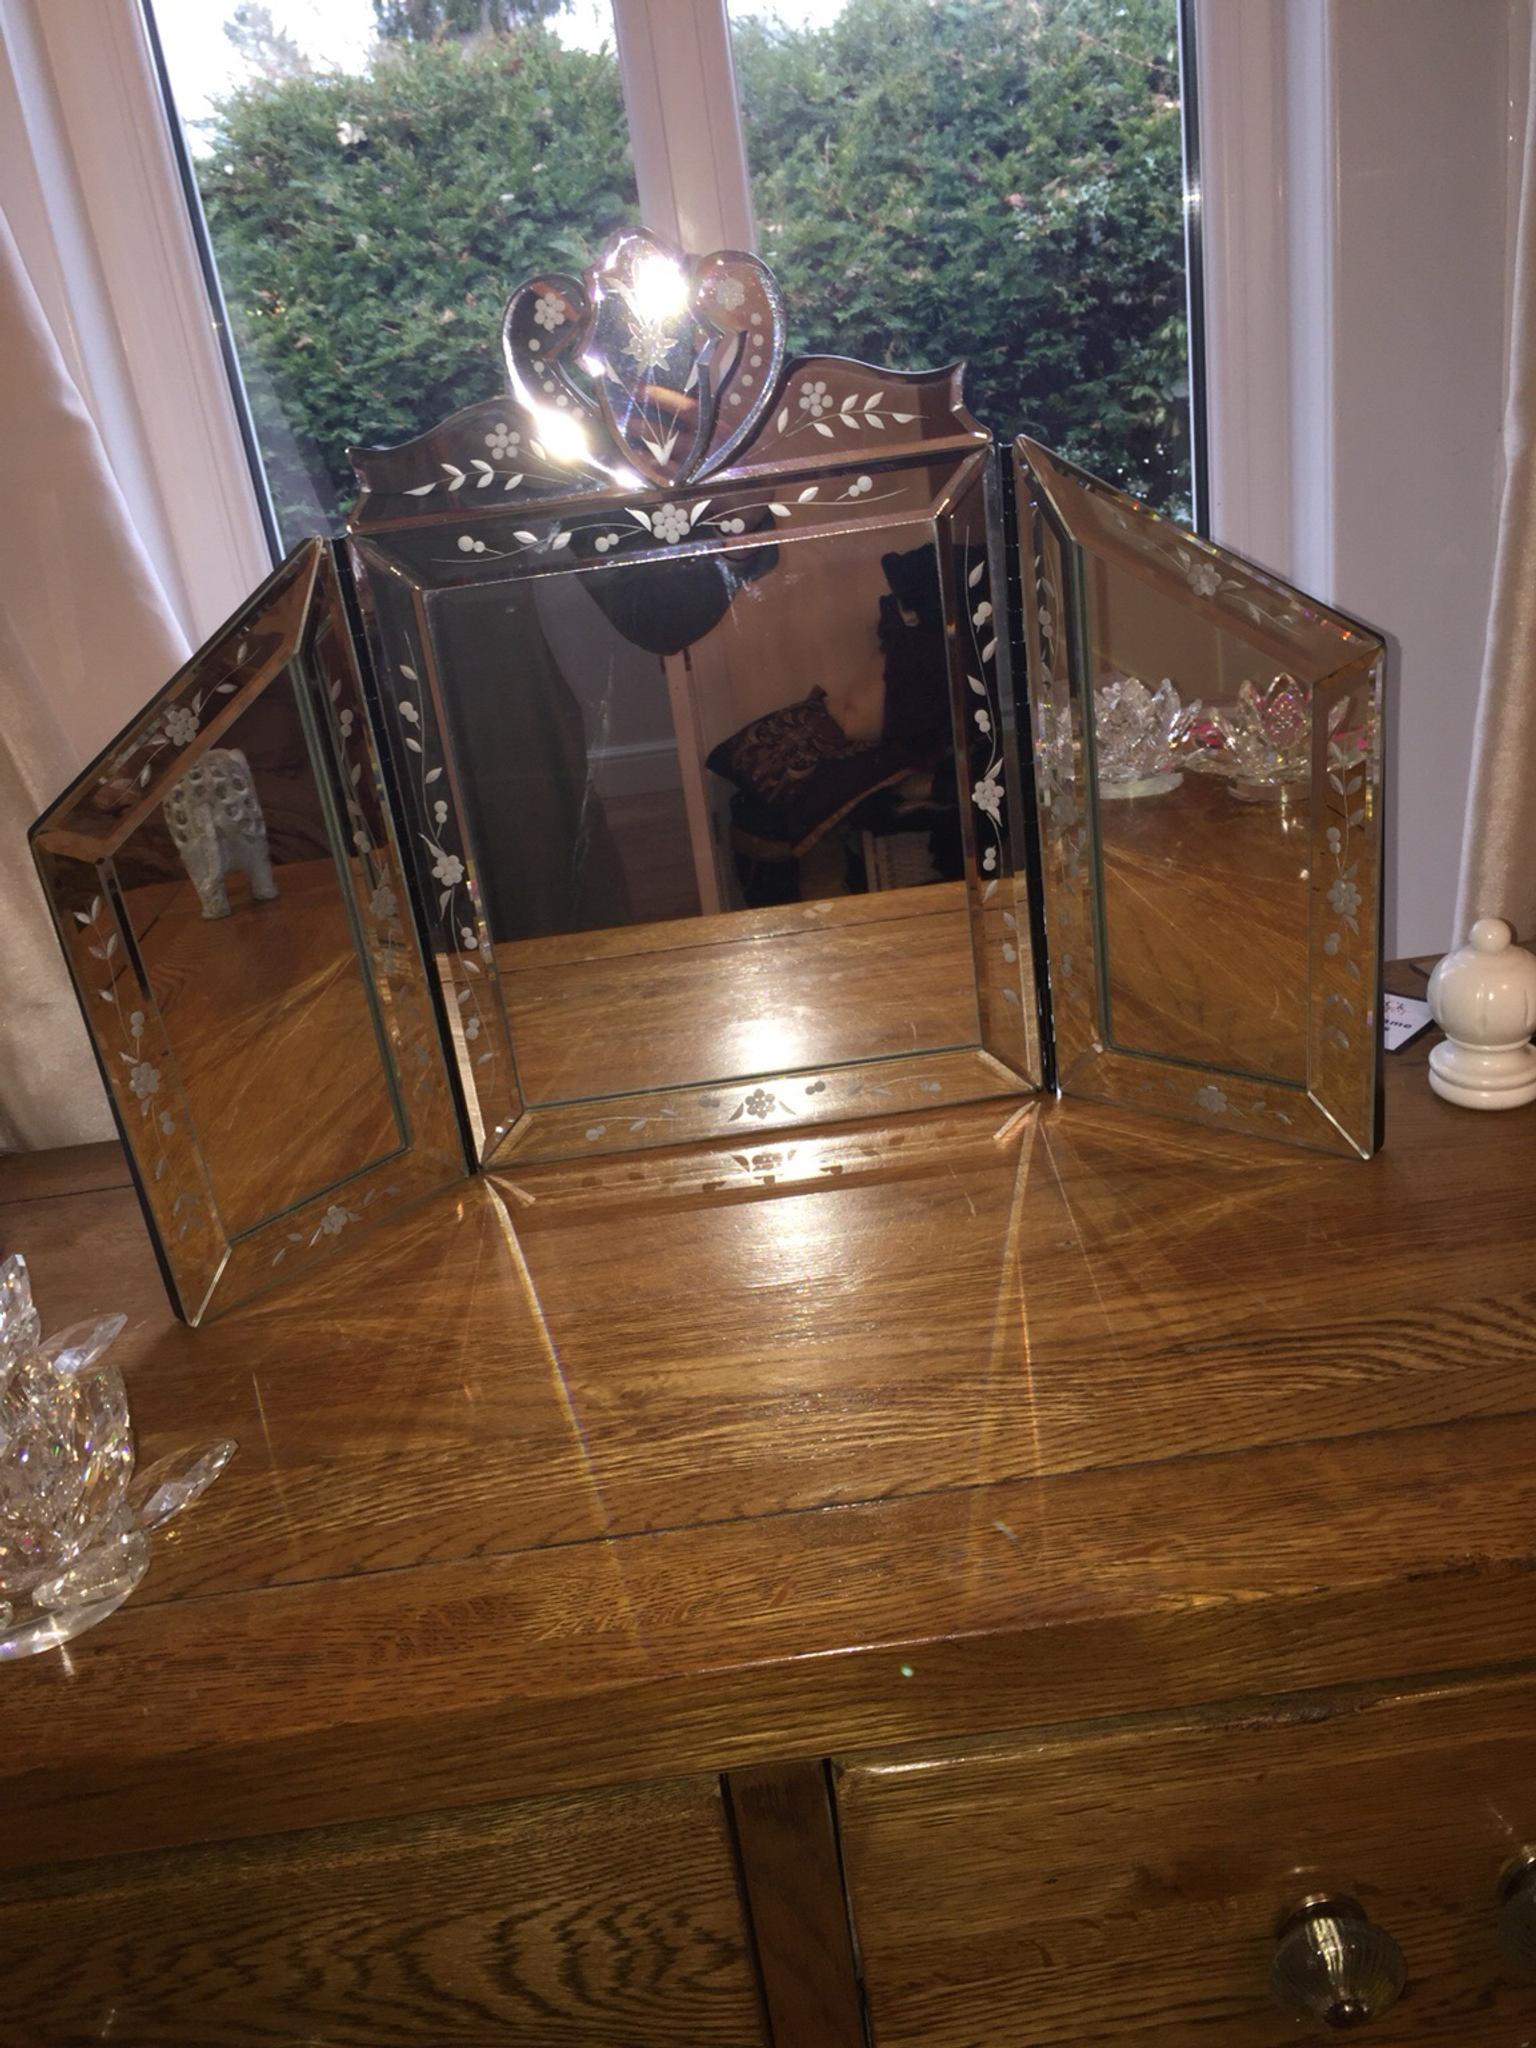 Past Times Small Dressing Room Table Mirror In Tandridge For 25 00 For Sale Shpock,Window Display Design Visual Merchandising Sketch